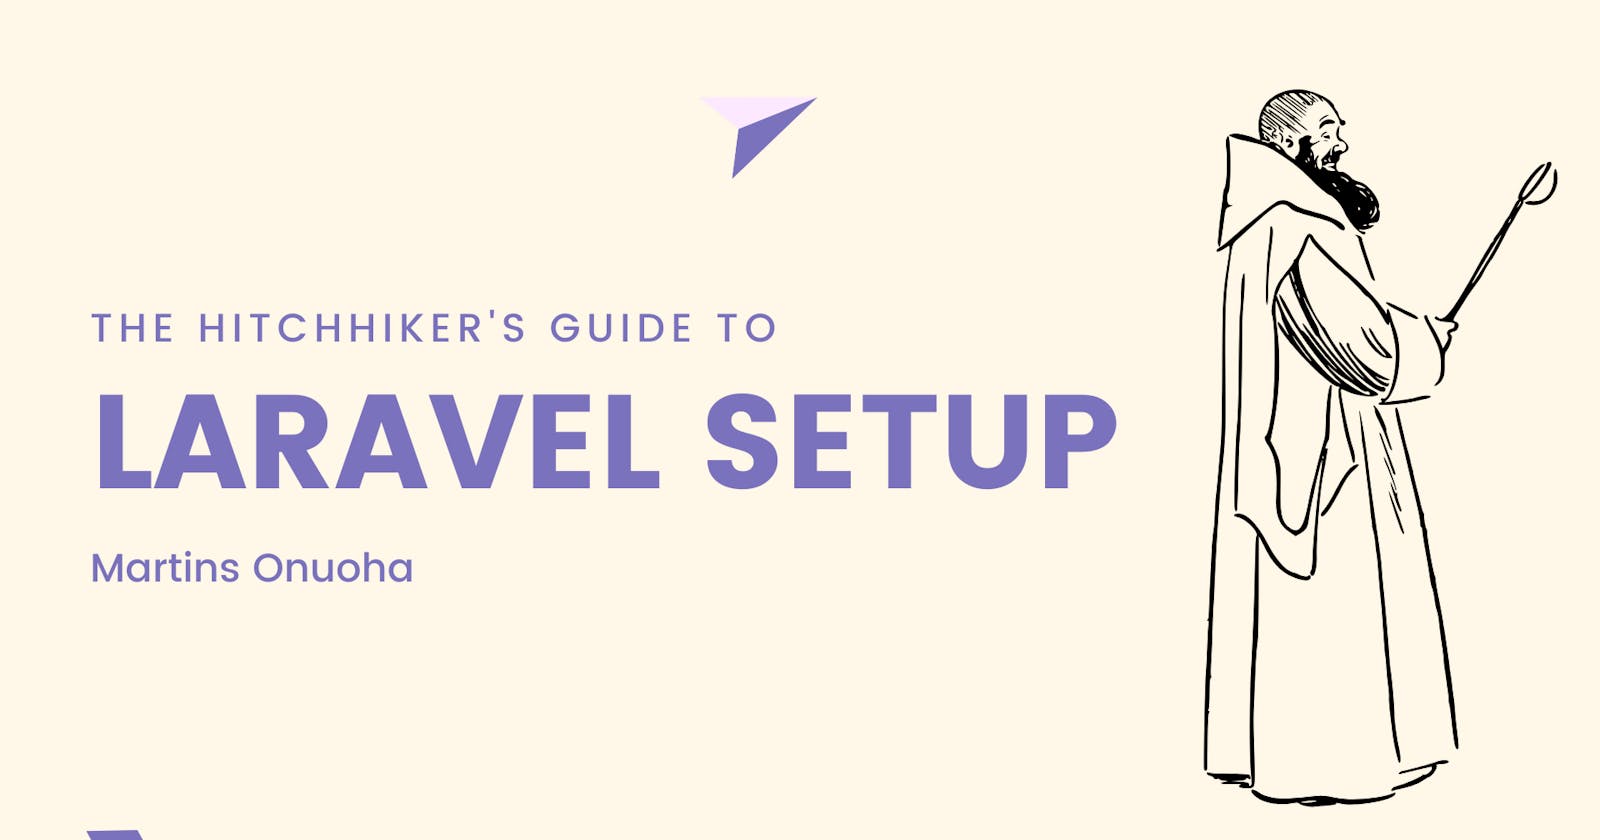 The Hitchhiker’s Guide to Laravel Setup